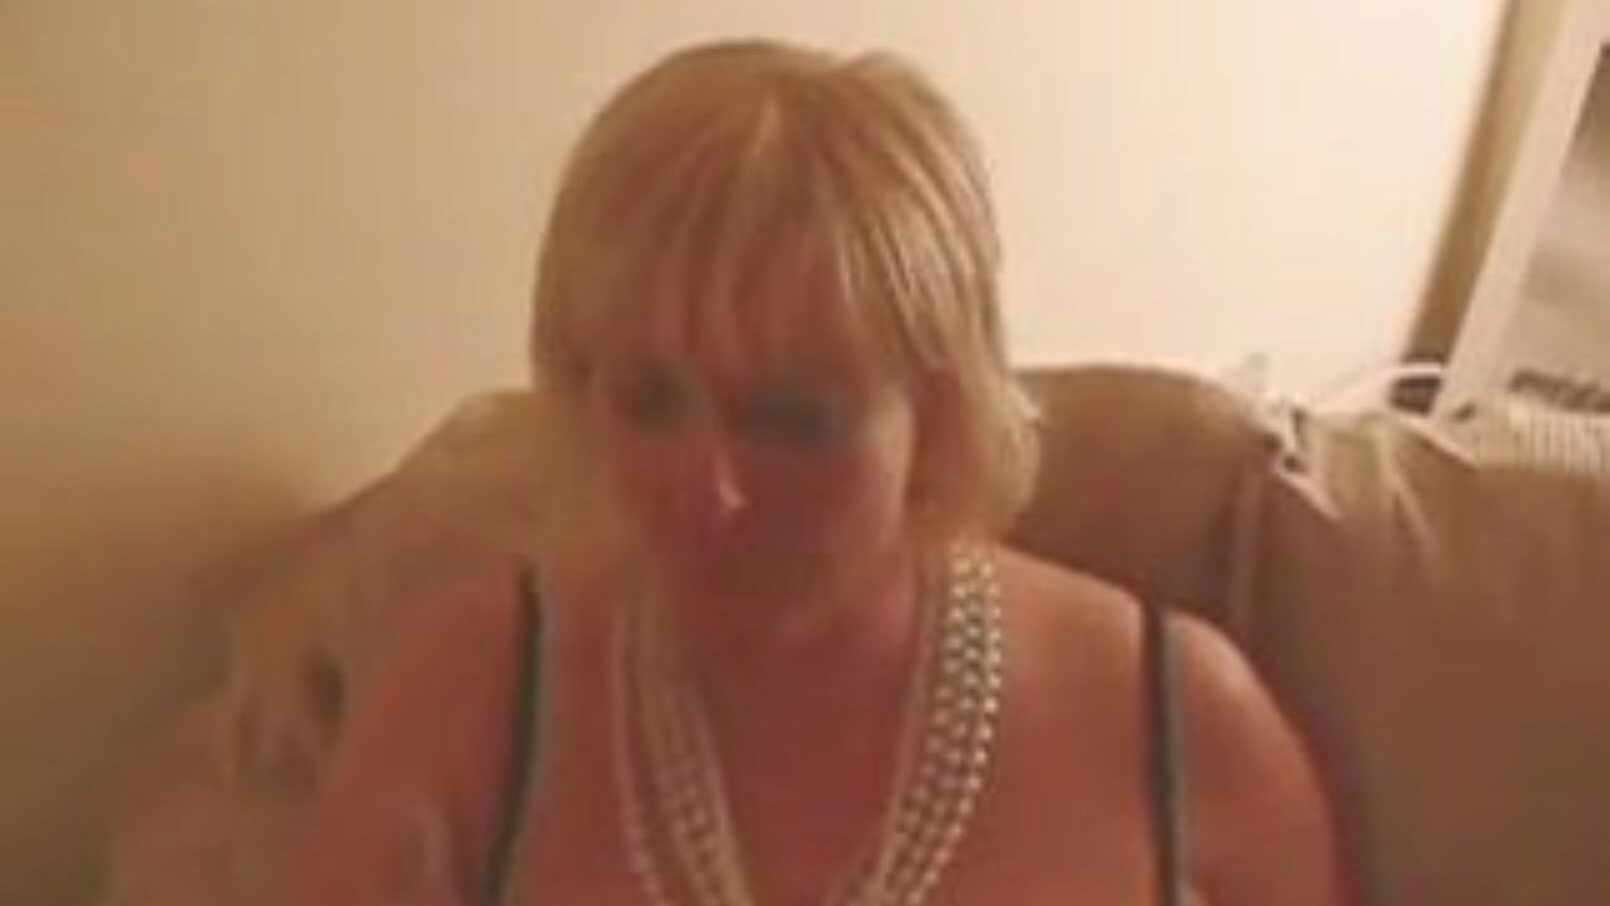 Filthy Whores Sharing 12 Loads of Spunk Gokkun Style... Watch Filthy Whores Sharing 12 Loads of Spunk Gokkun Style movie scene on xHamster - the ultimate database of free British Addicted to Cum pornography tube videos